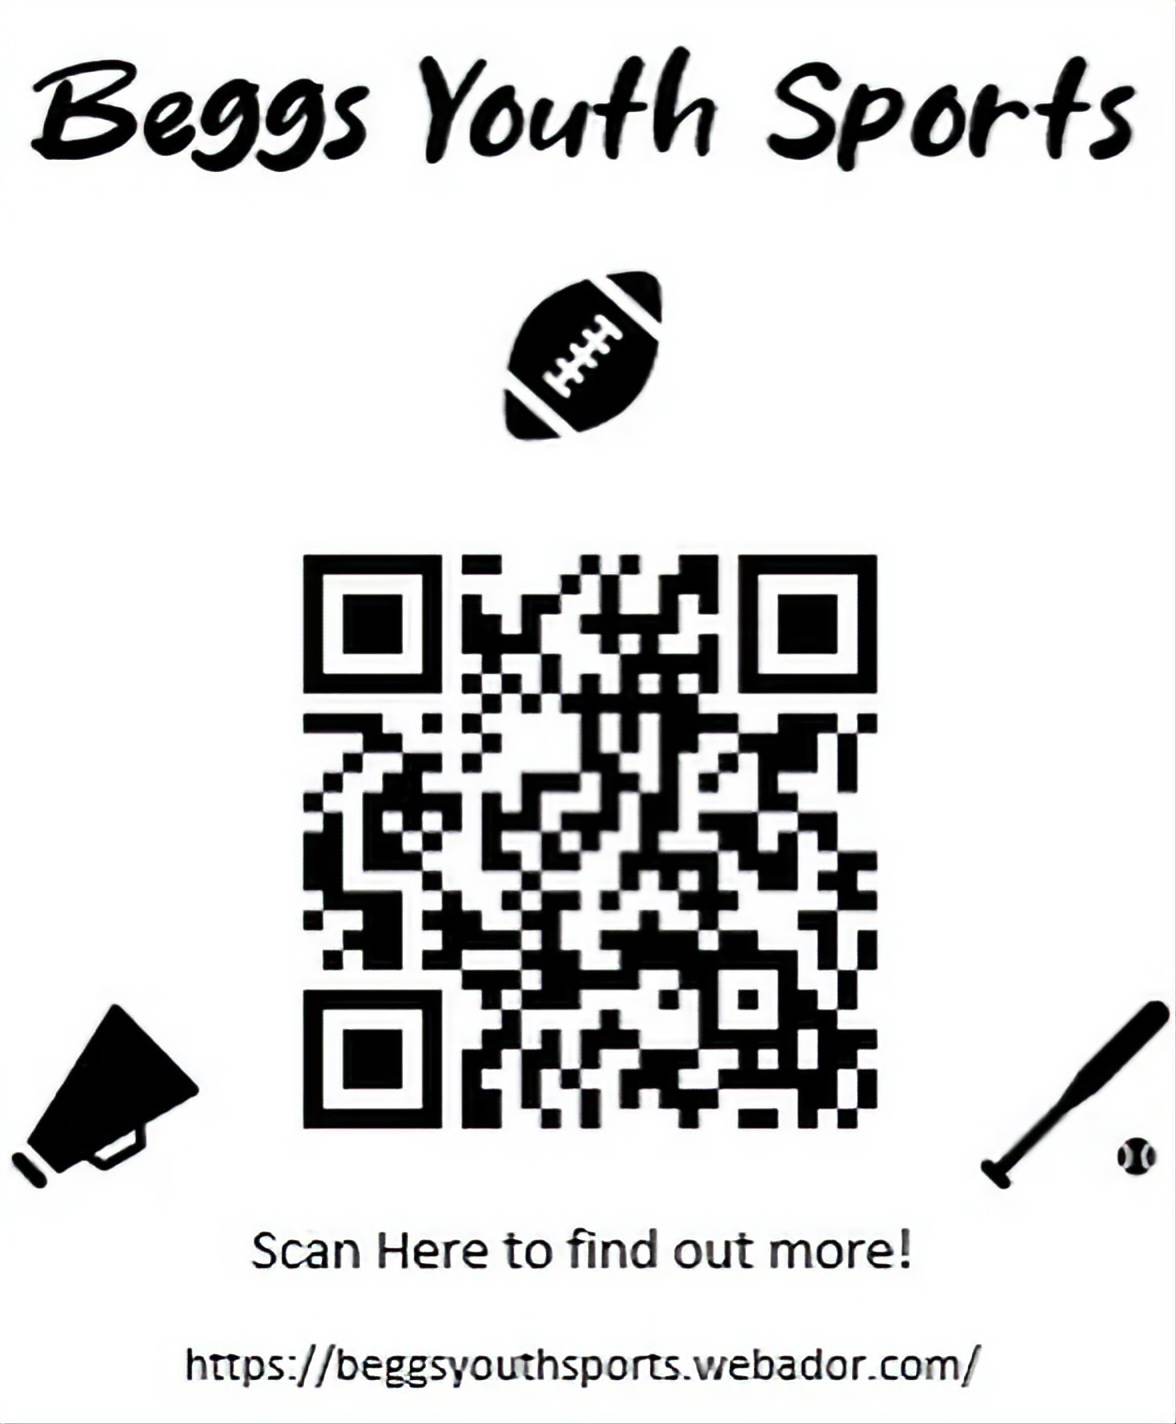 Beggs Youth Sports QR Code 